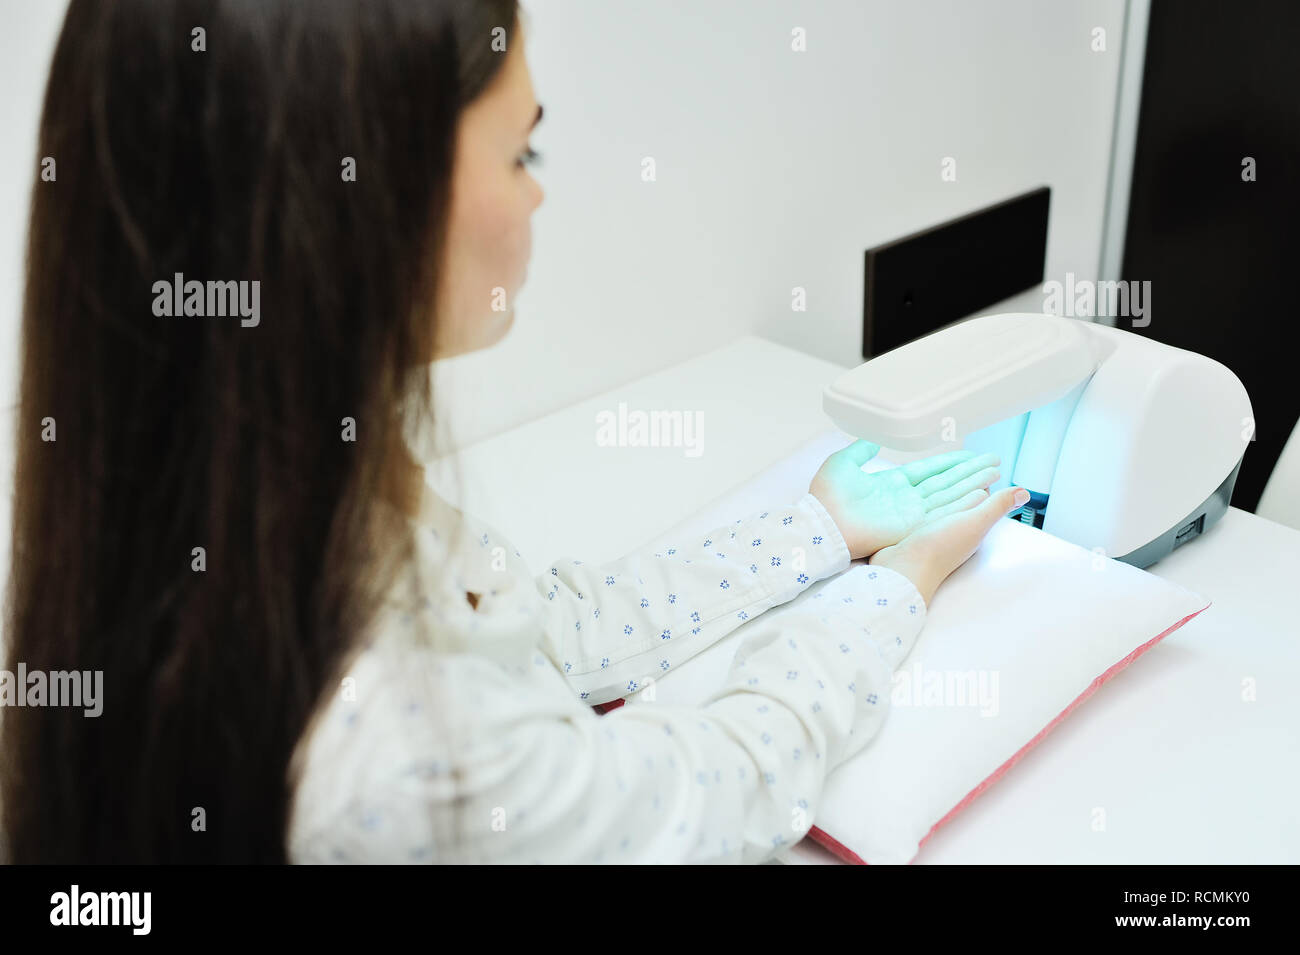 doctor spends psoriasis treatment using ultraviolet lamps and phototherapy. Stock Photo